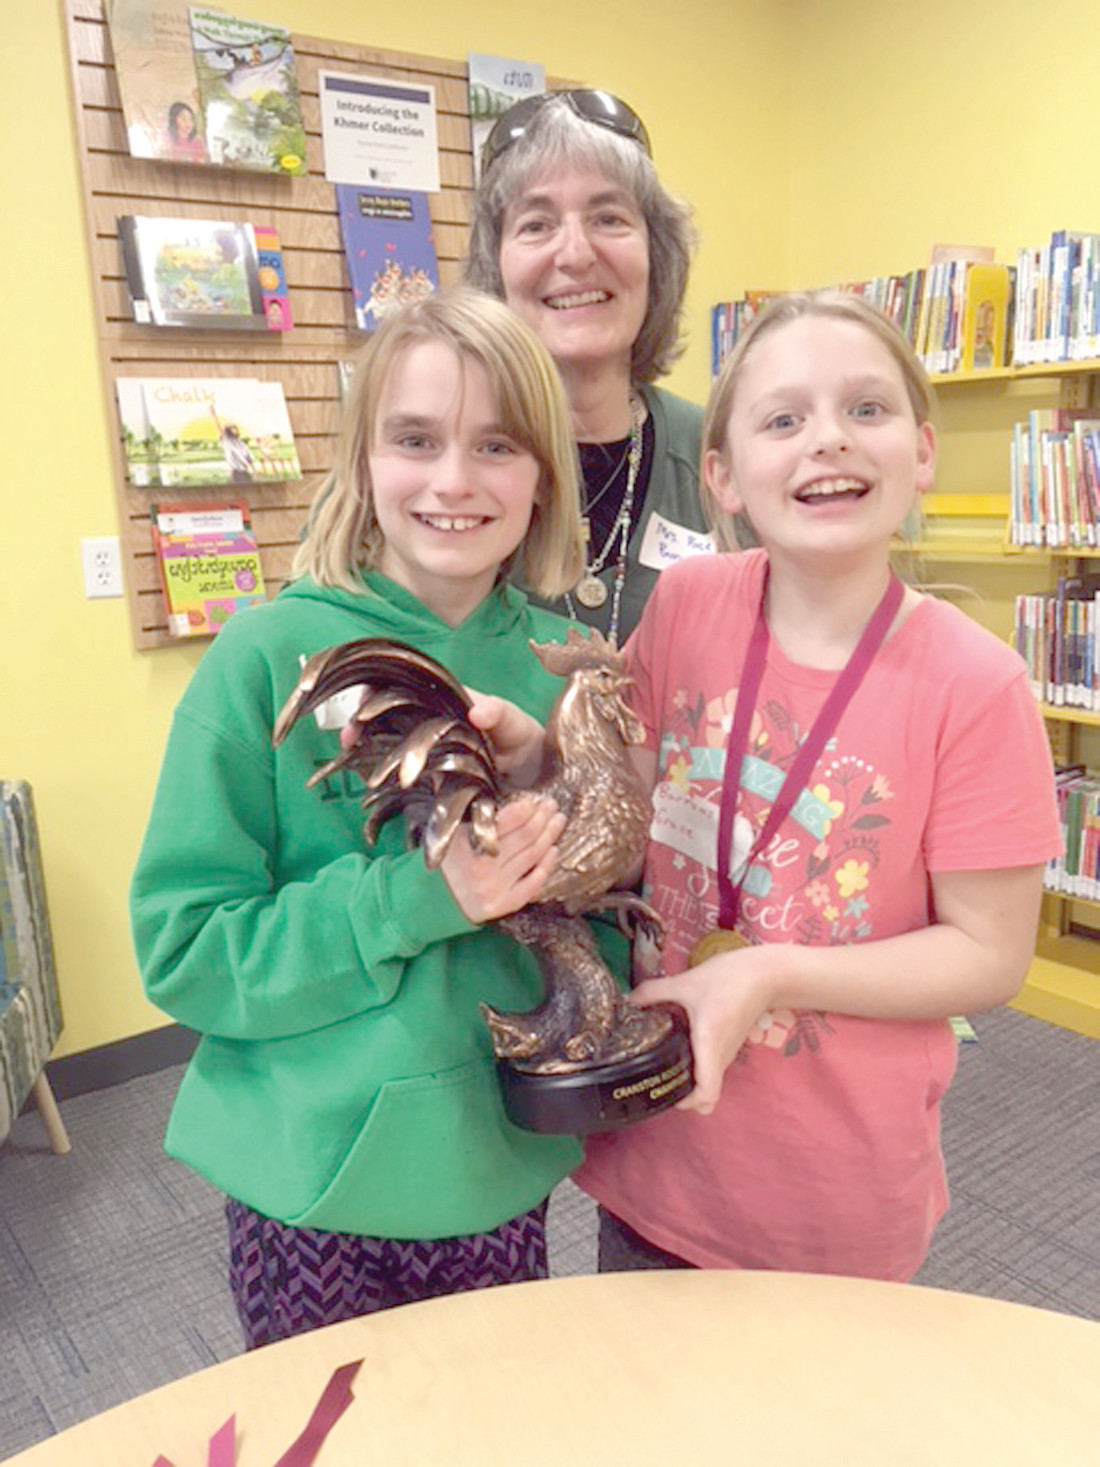 TROPHY COMES HOME TO ROOST: Getting their hands on the first Rooster Games Trophy are Barrows students Kara Bush and Grace Michaelson alongside Barrows School Librarian Sue Rose.